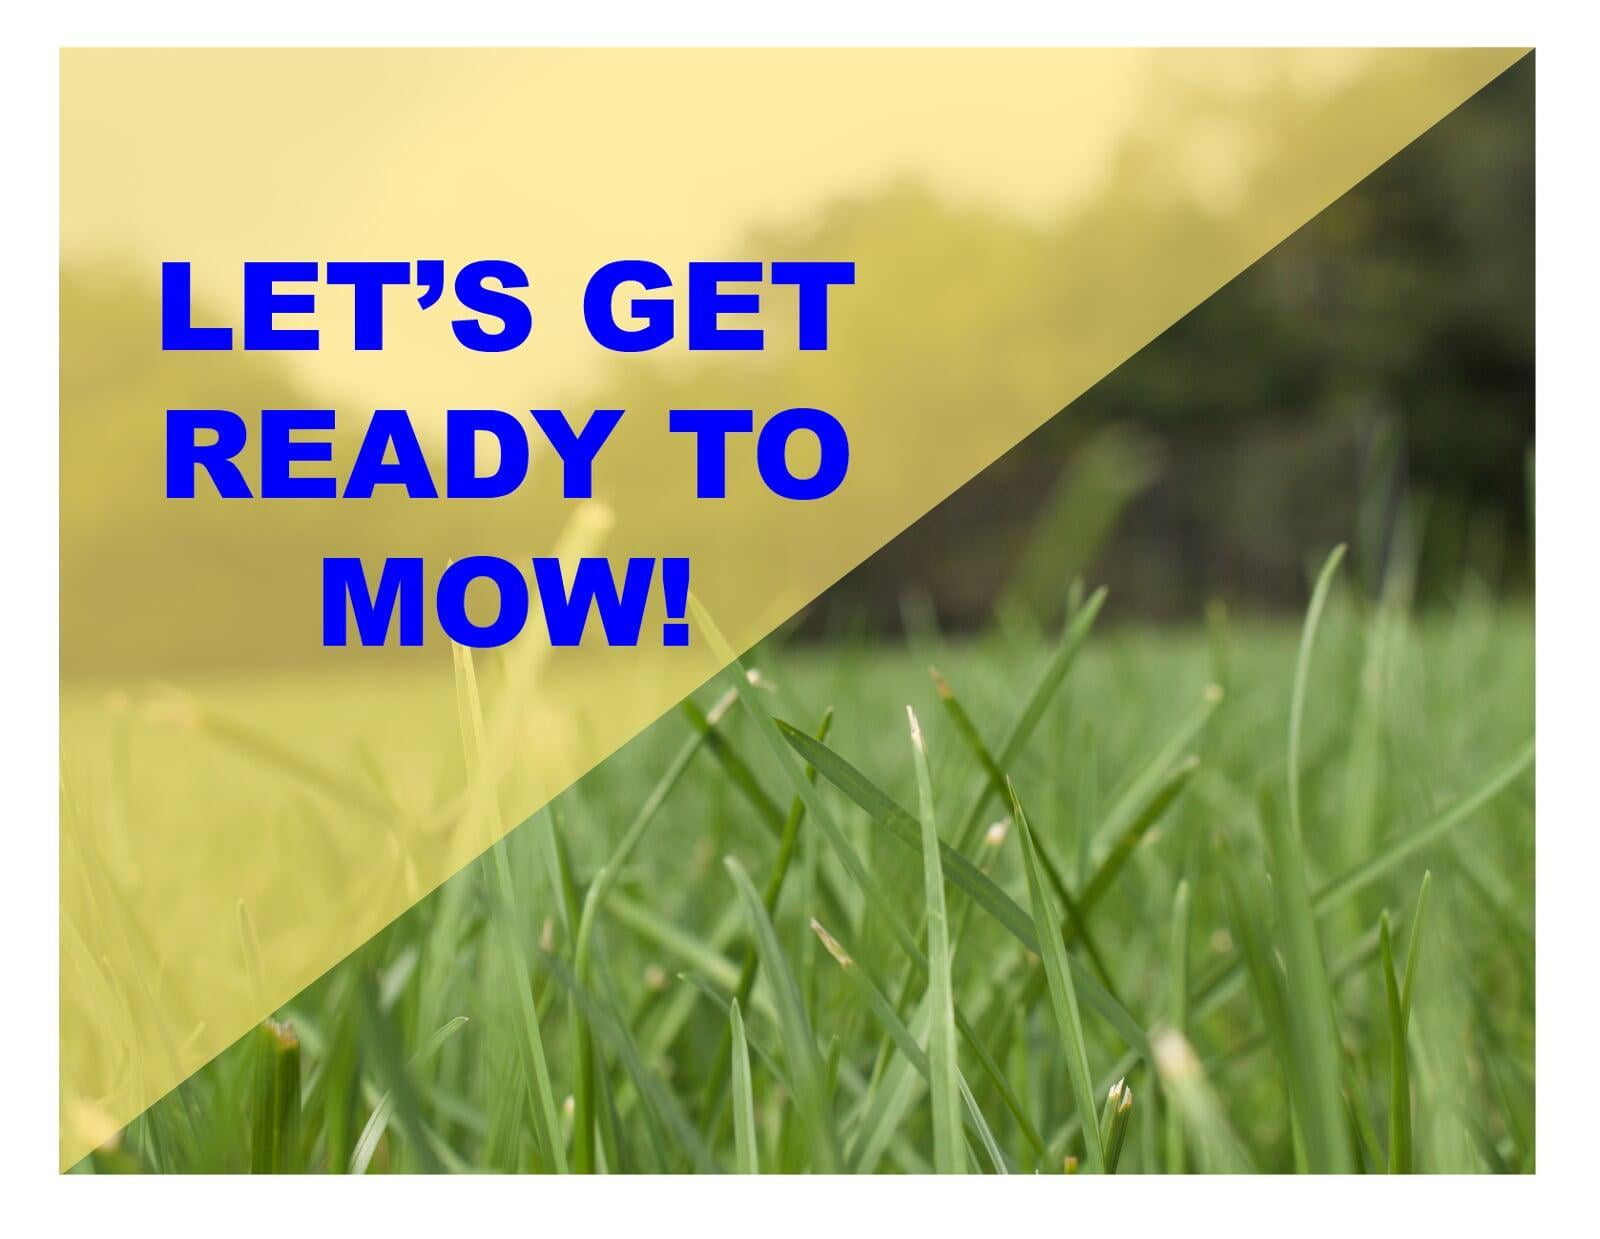 Let's Get Ready to Mow!